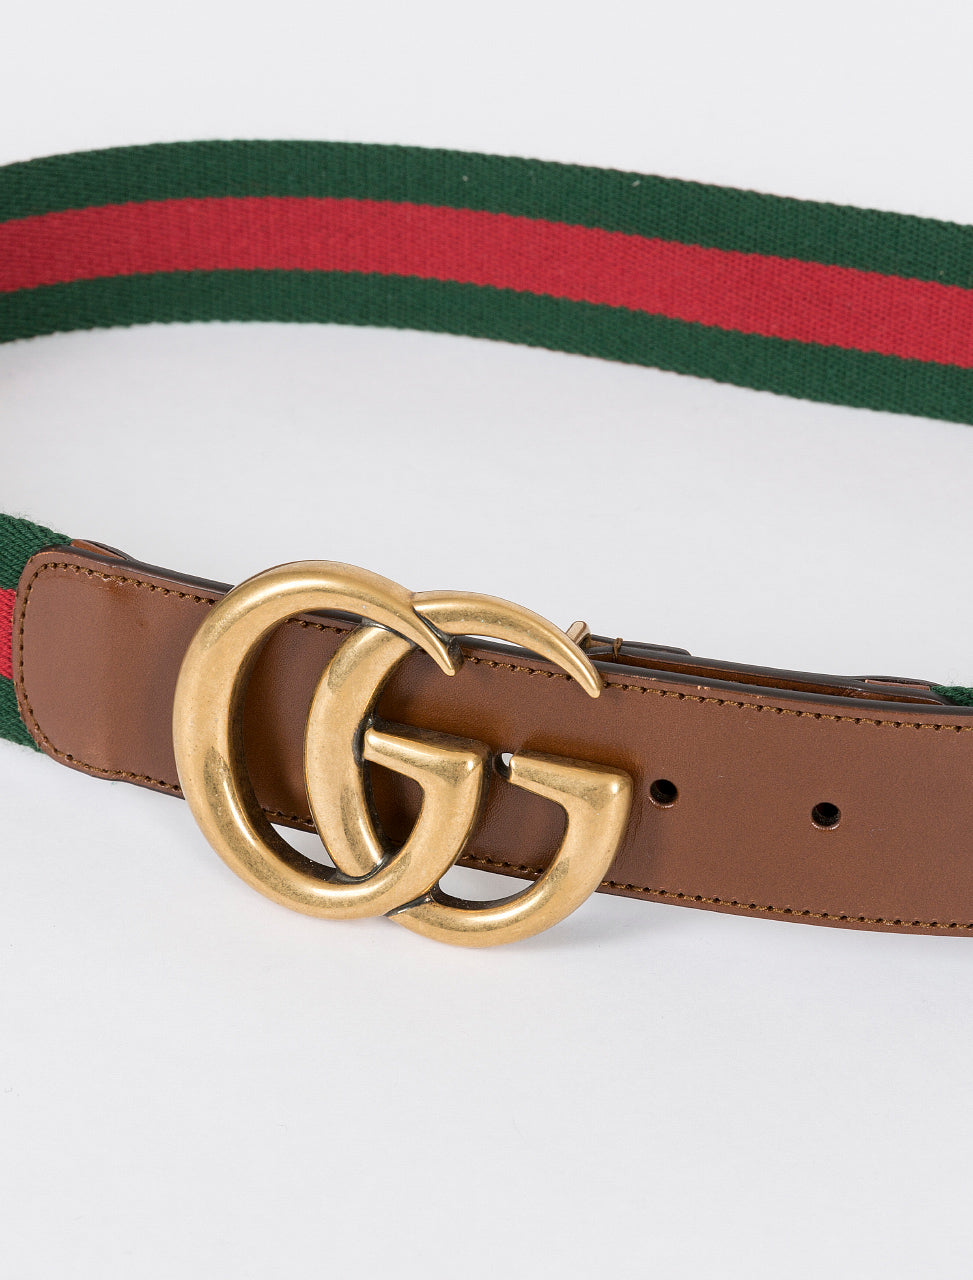 Gucci Web Belt with G Buckle